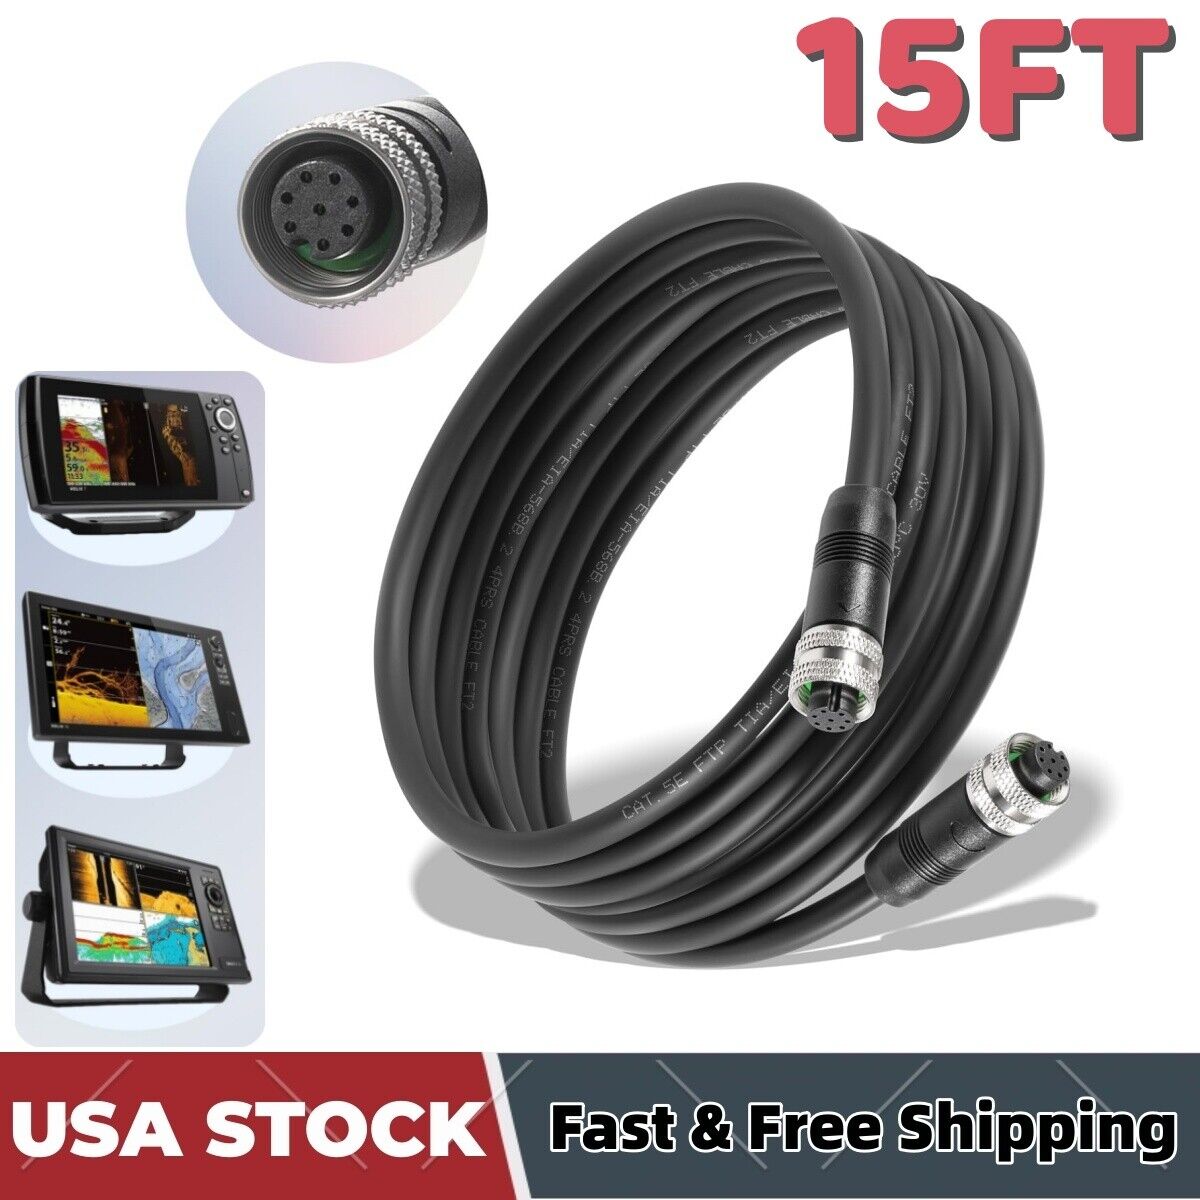 Replace for Humminbird 720073-5 15FT Boat Ethernet Cable, AS EC 5E